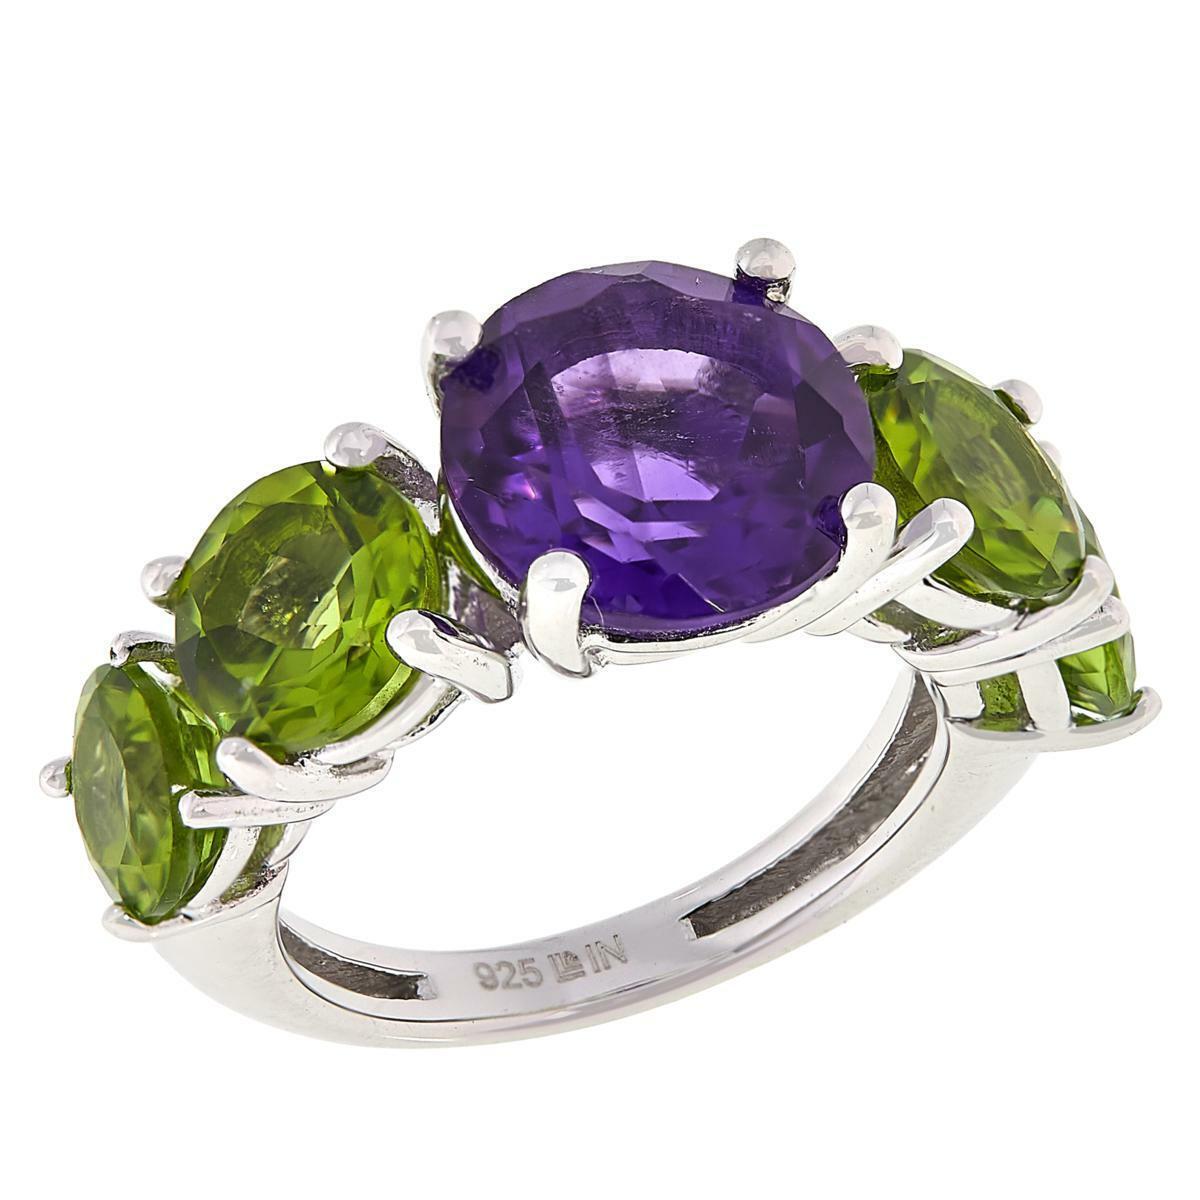 Colleen Lopez Sterling Silver African Amethyst & Peridot Ring, Size 6